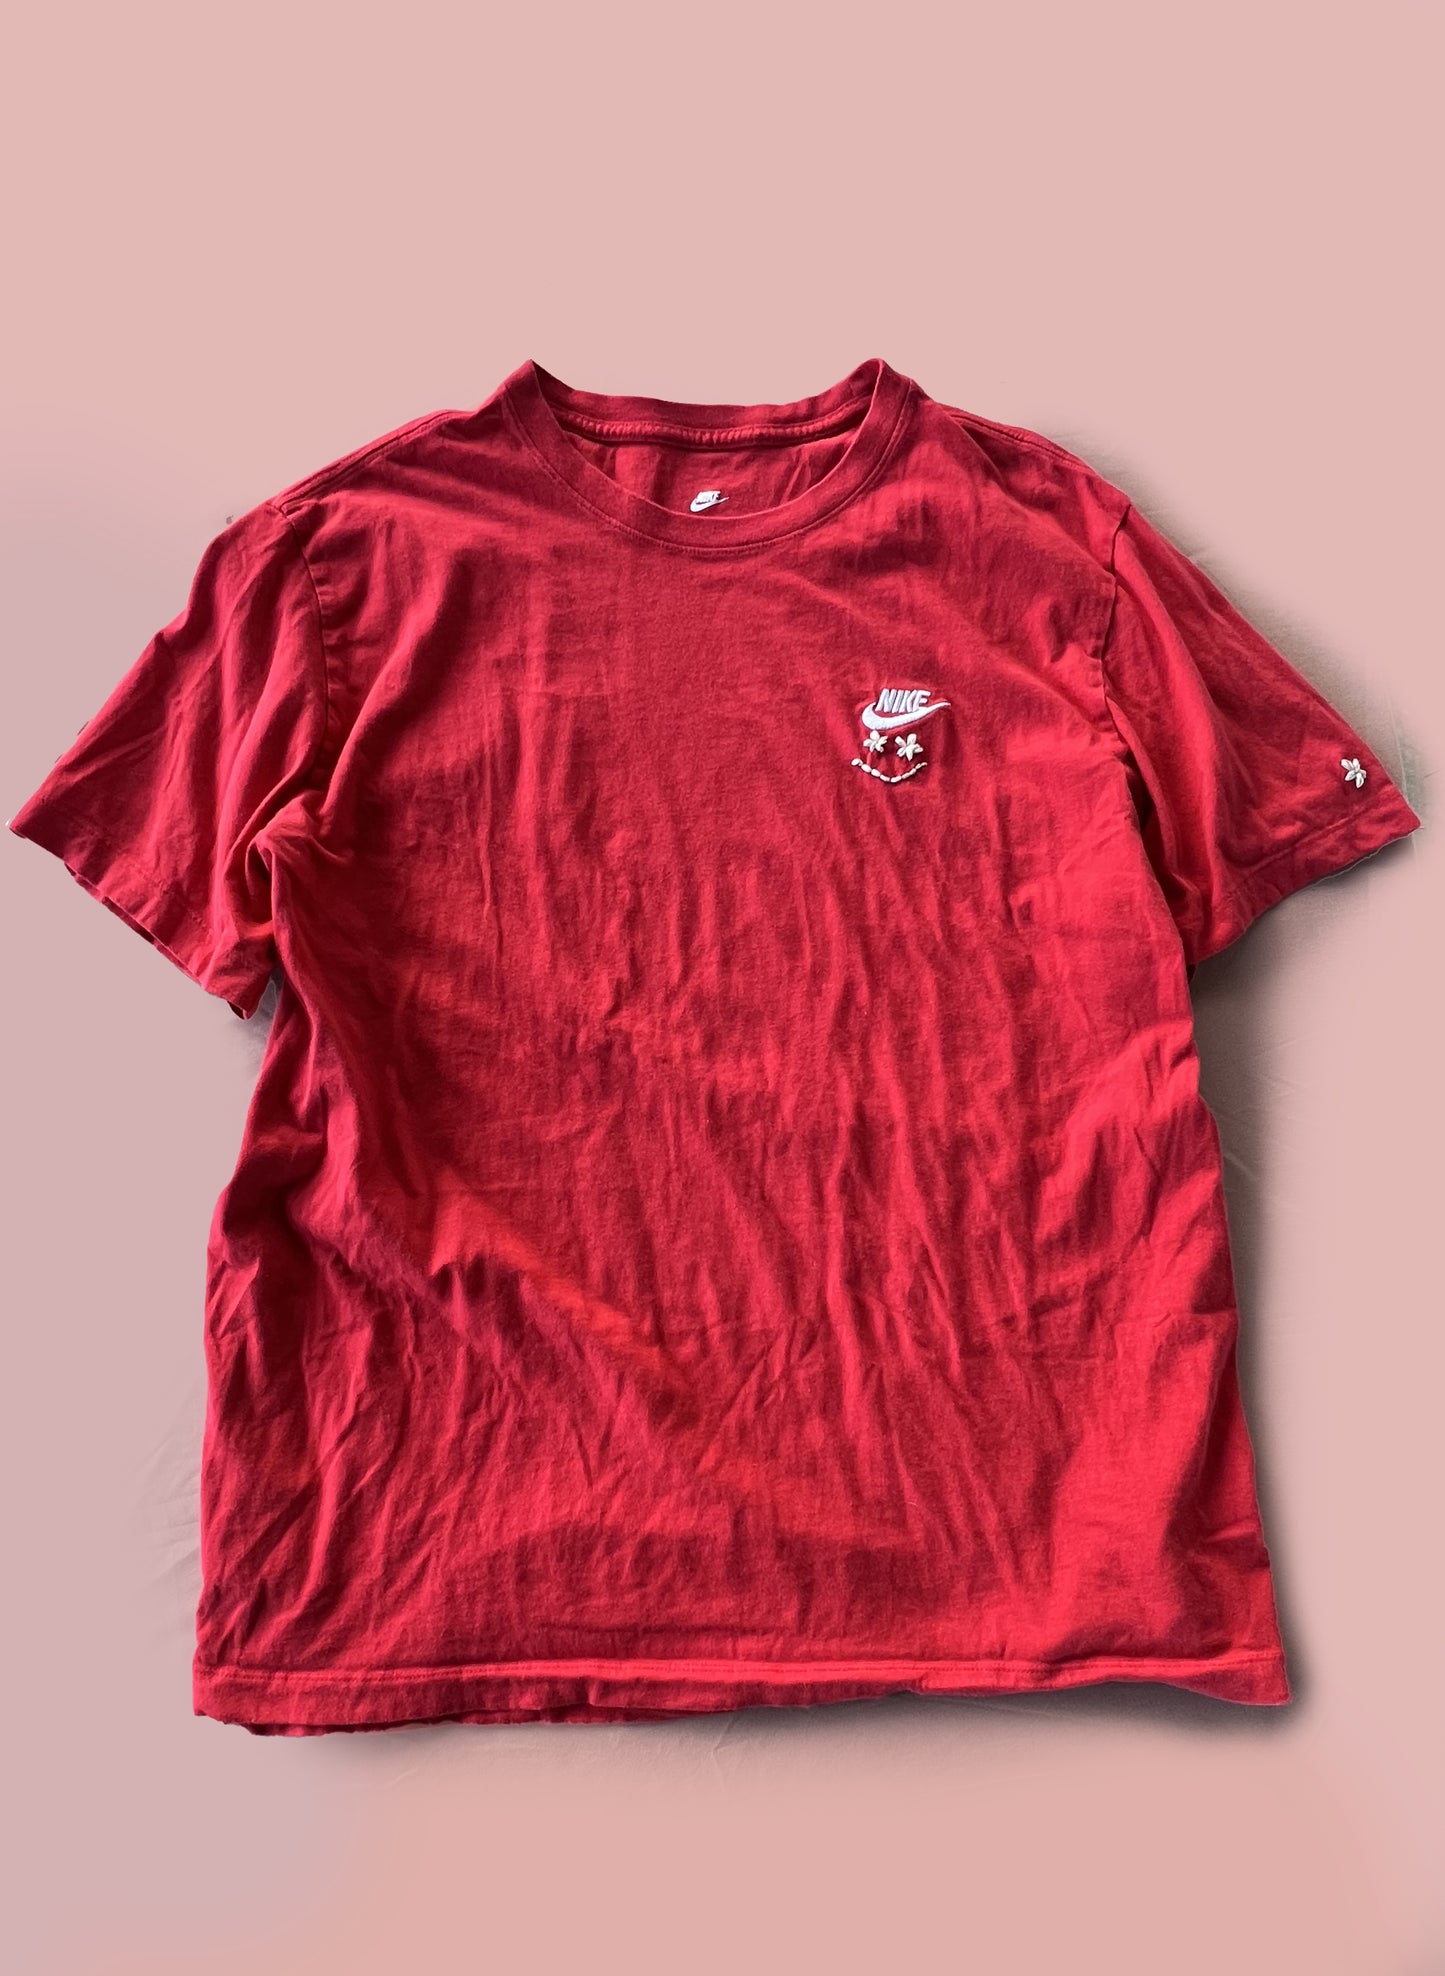 Smiley T-Shirt - Nike (Red)